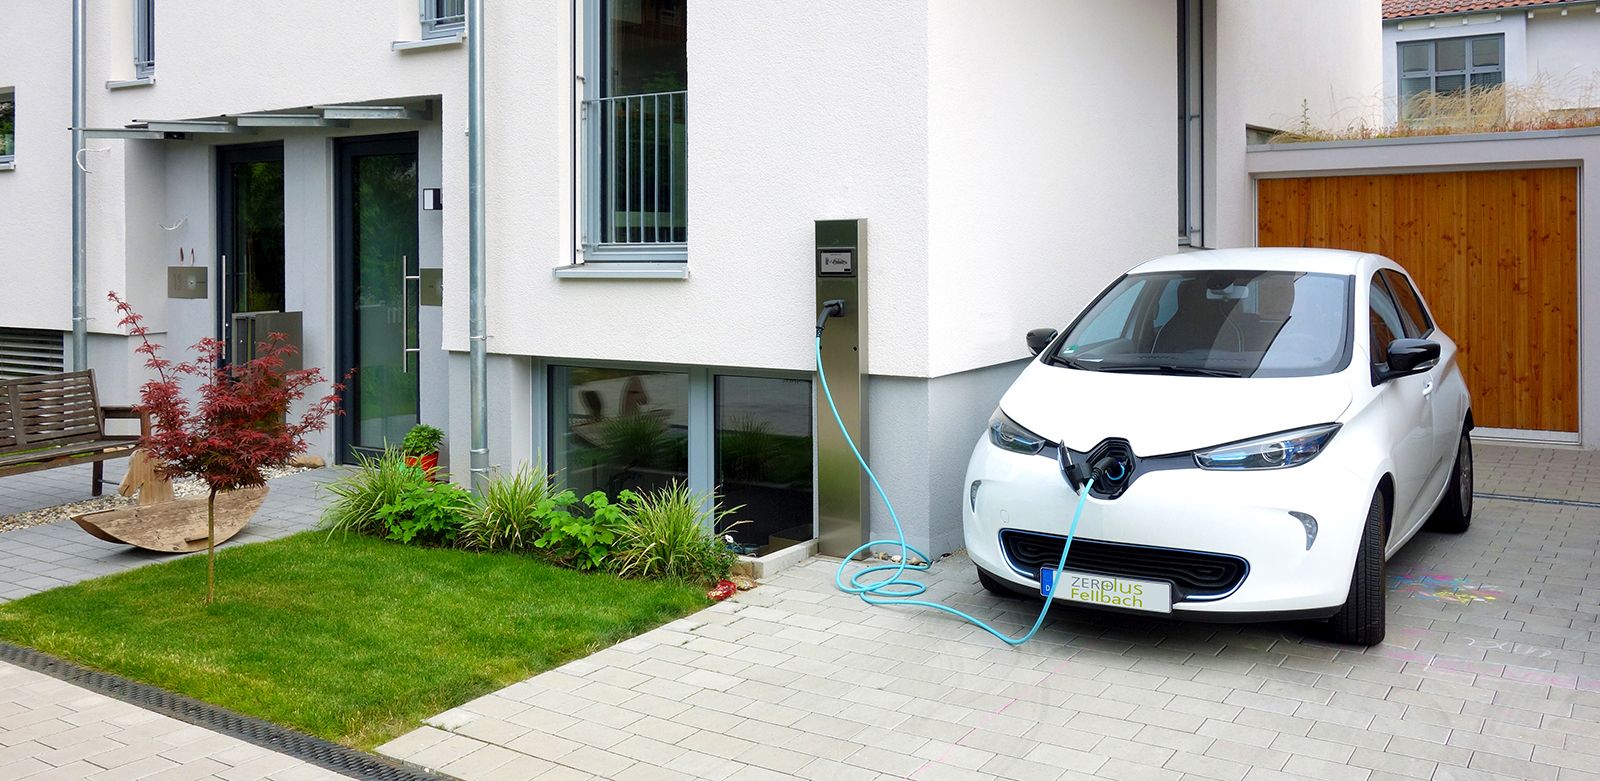 An electric vehicle is charged with photovoltaic power from the roof of the house using a charging station.